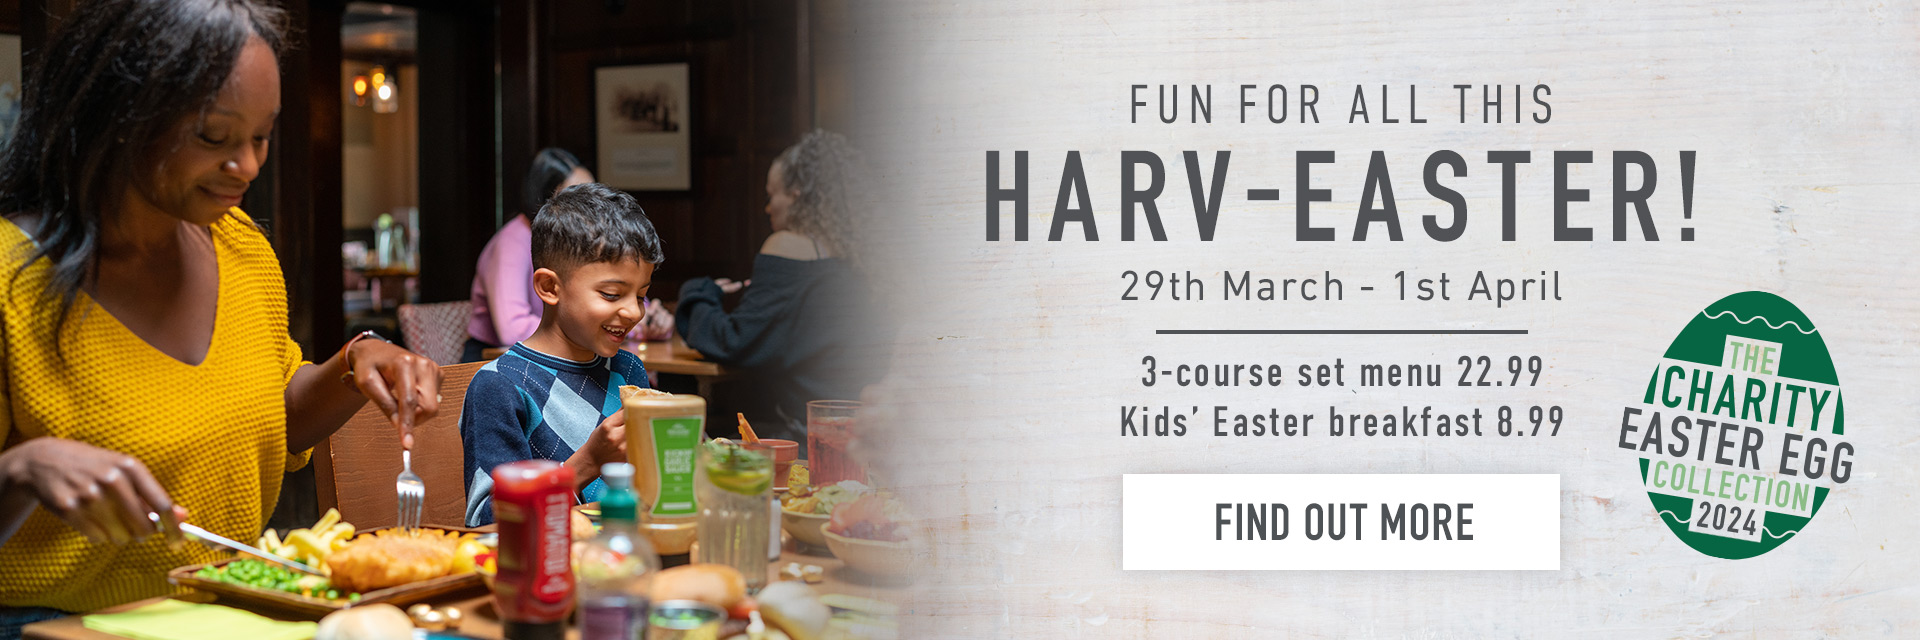 Easter at HORSE & GROOM SIDCUP in Sidcup